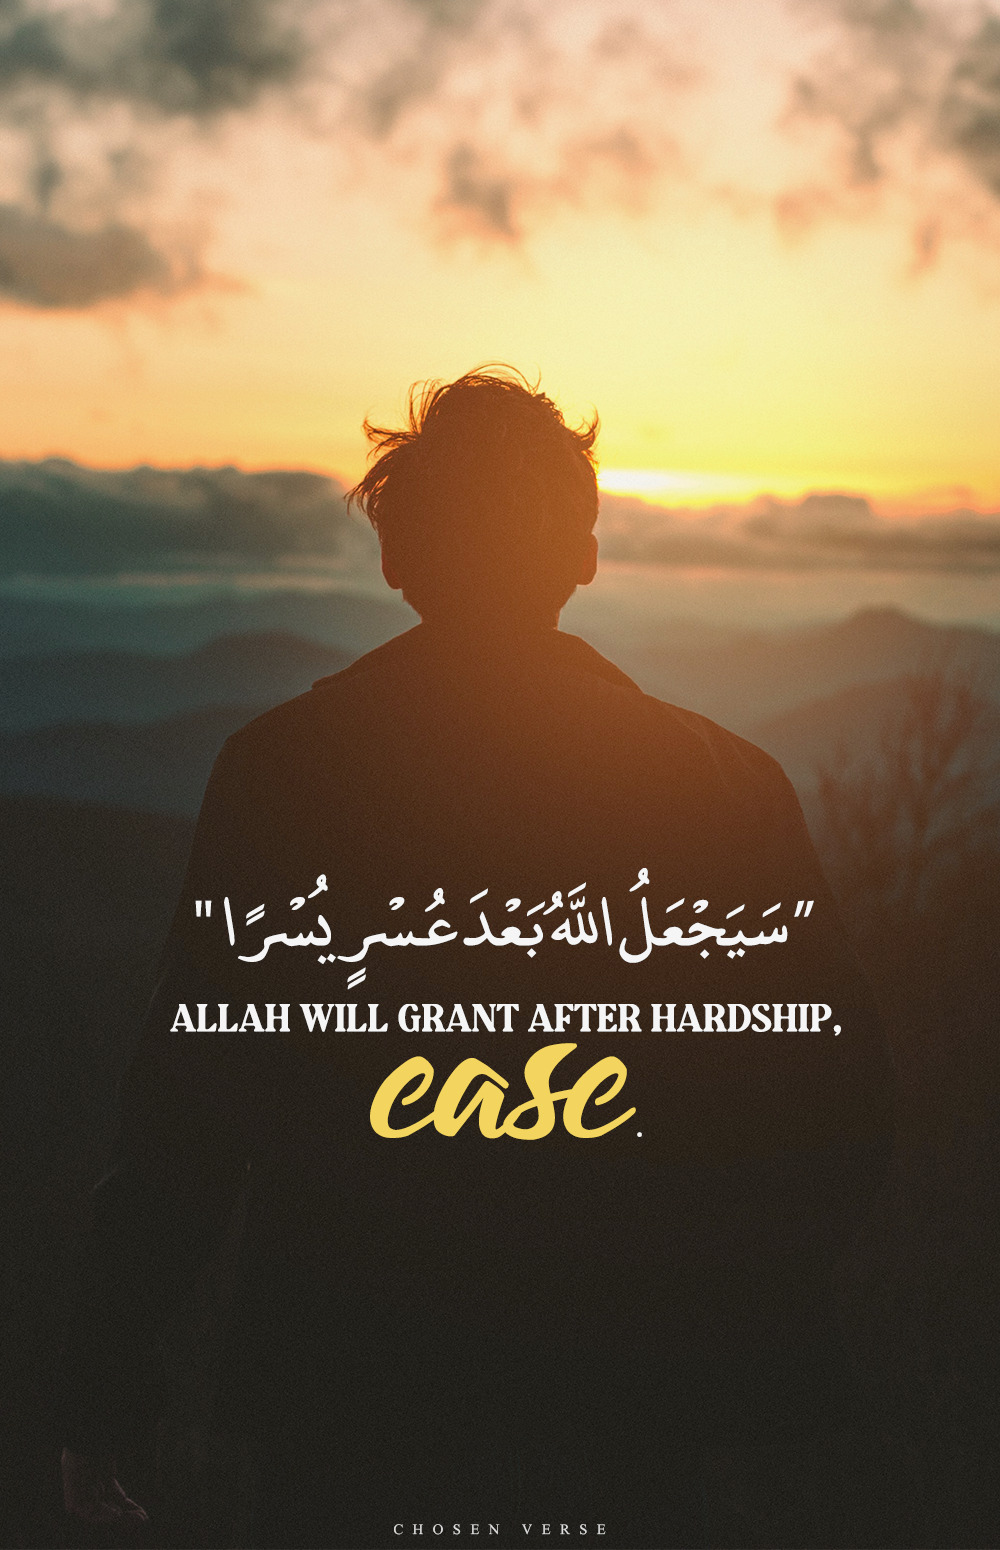 Ease after hardship. - Inspirational Islamic Quotes